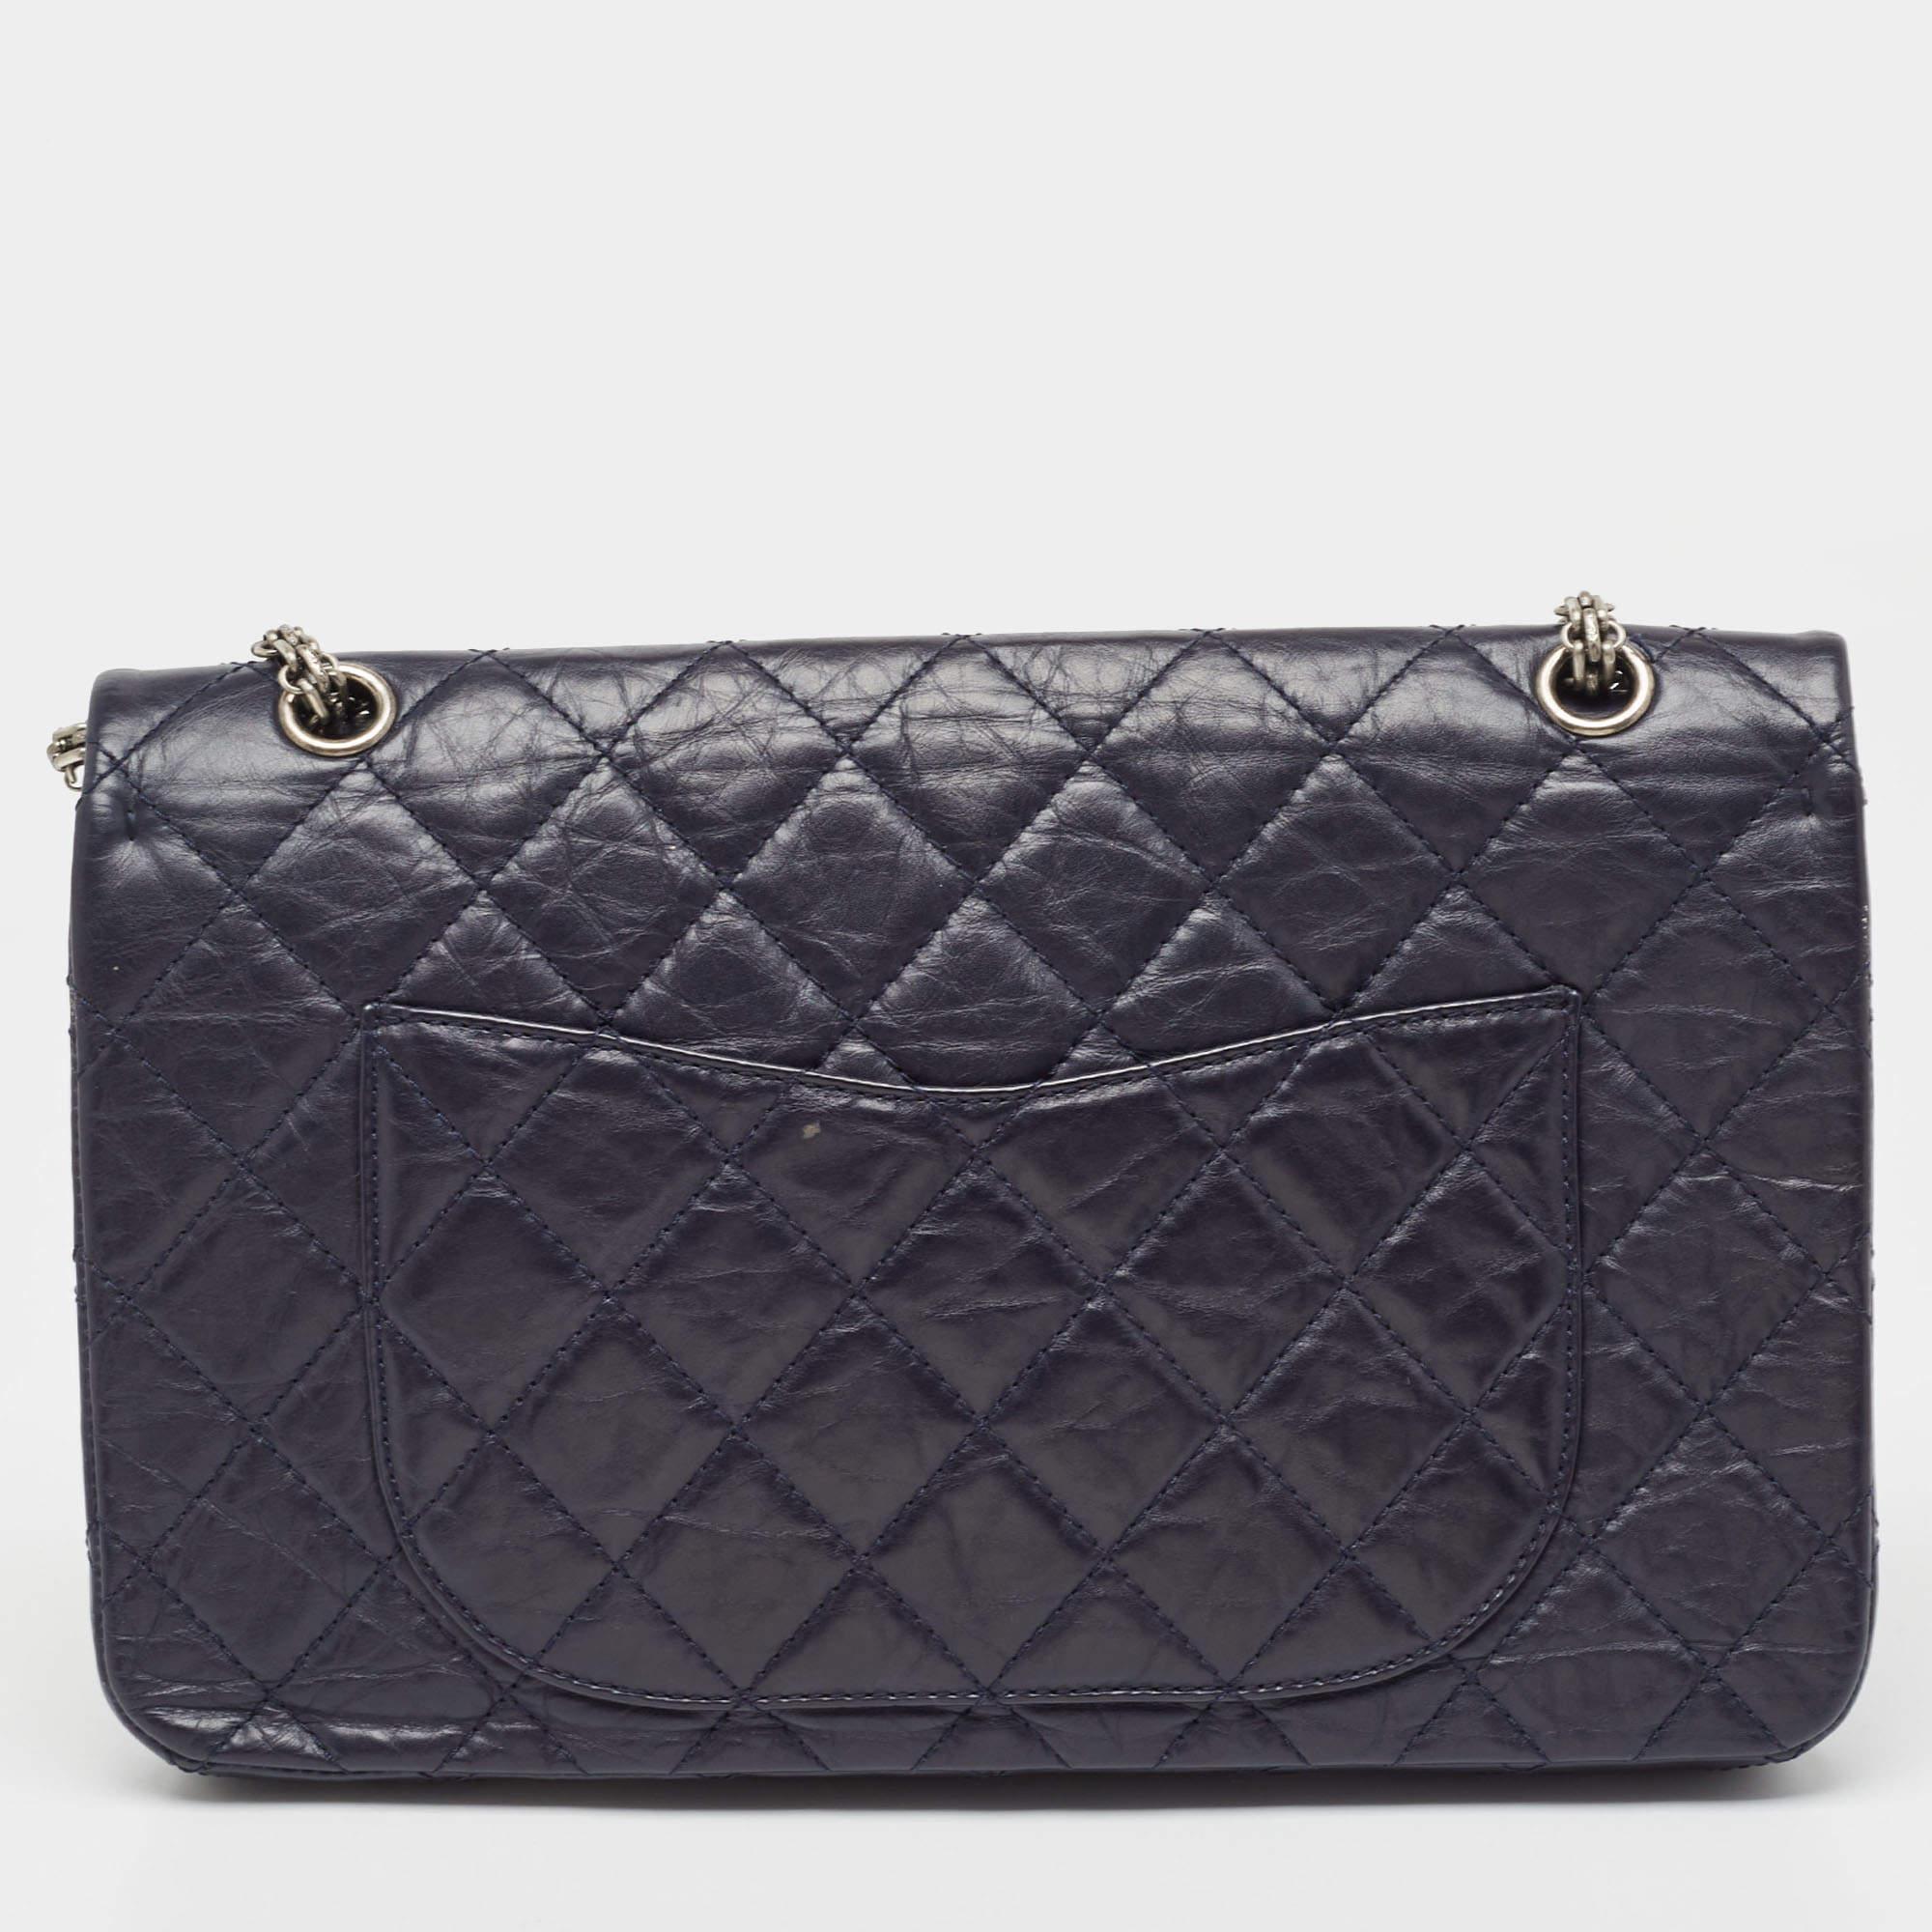 Chanel Navy Blue Quilted Aged Leather 227 Reissue 2.55 Flap Bag For Sale 9